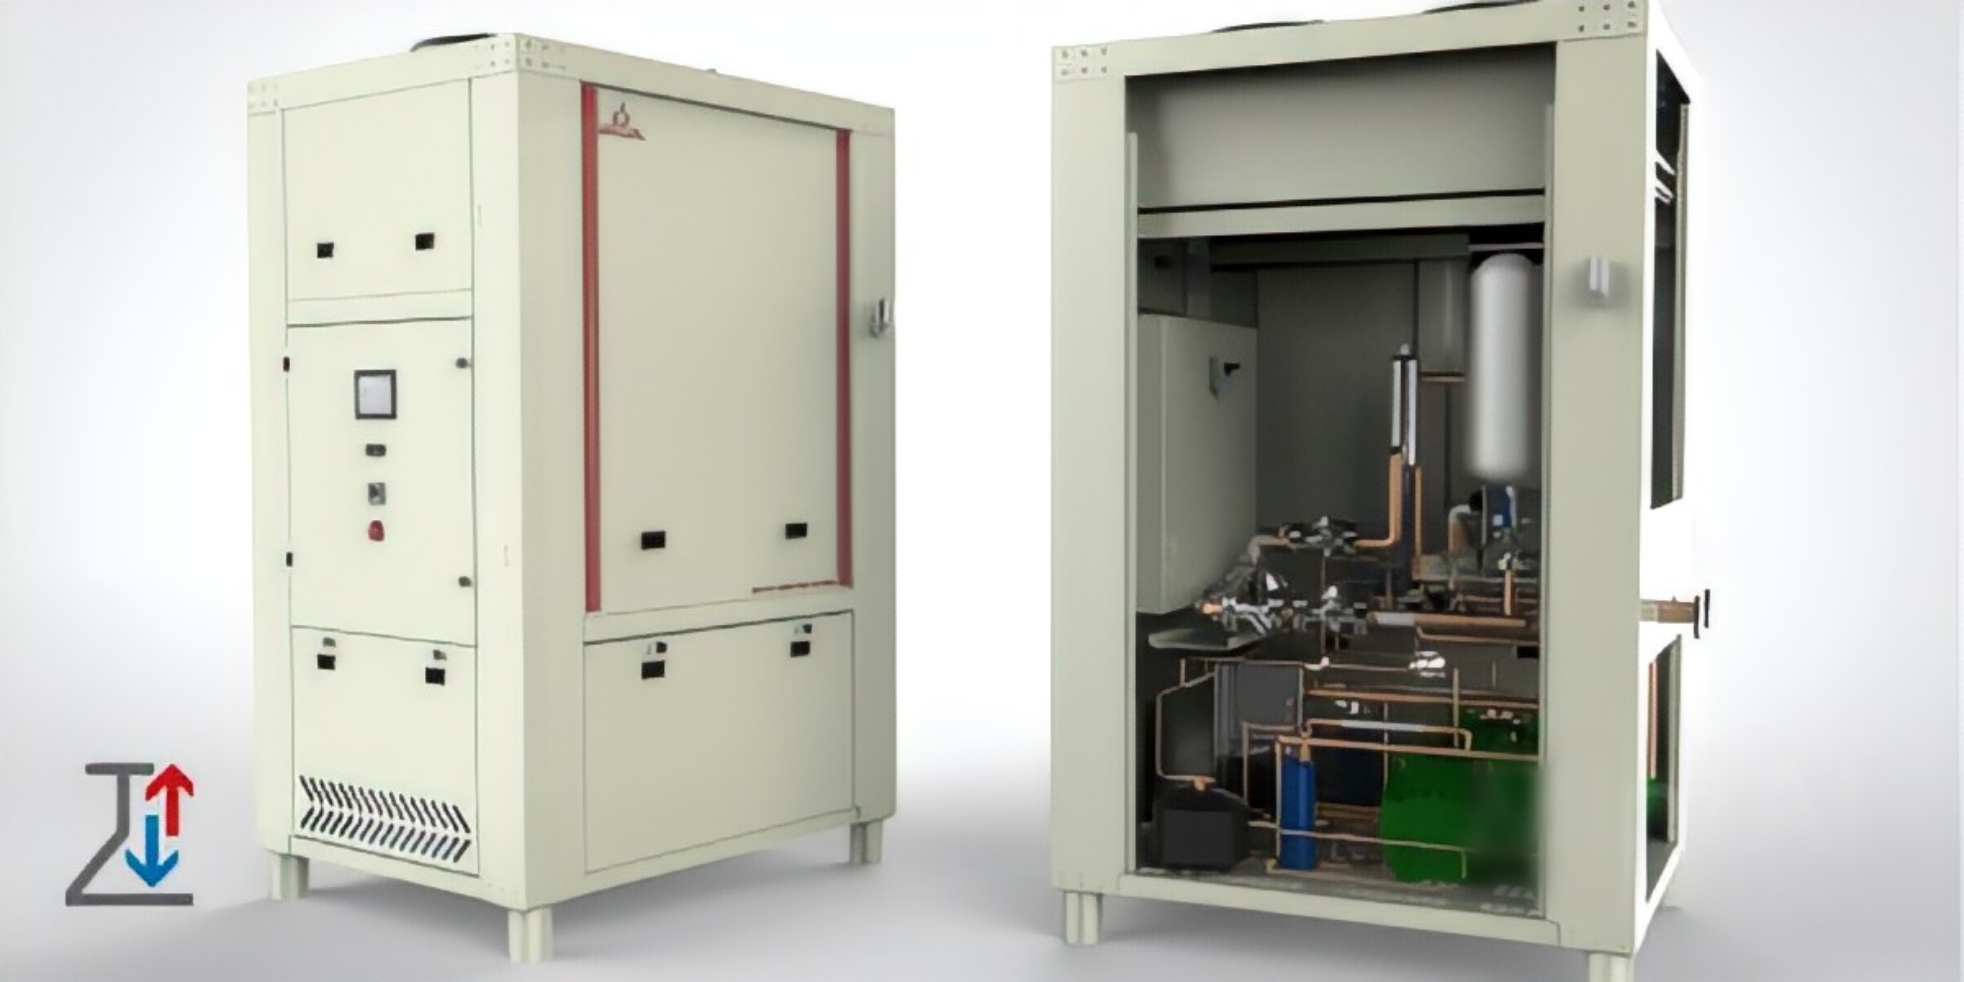 all about Deep temperature laboratory Chiller